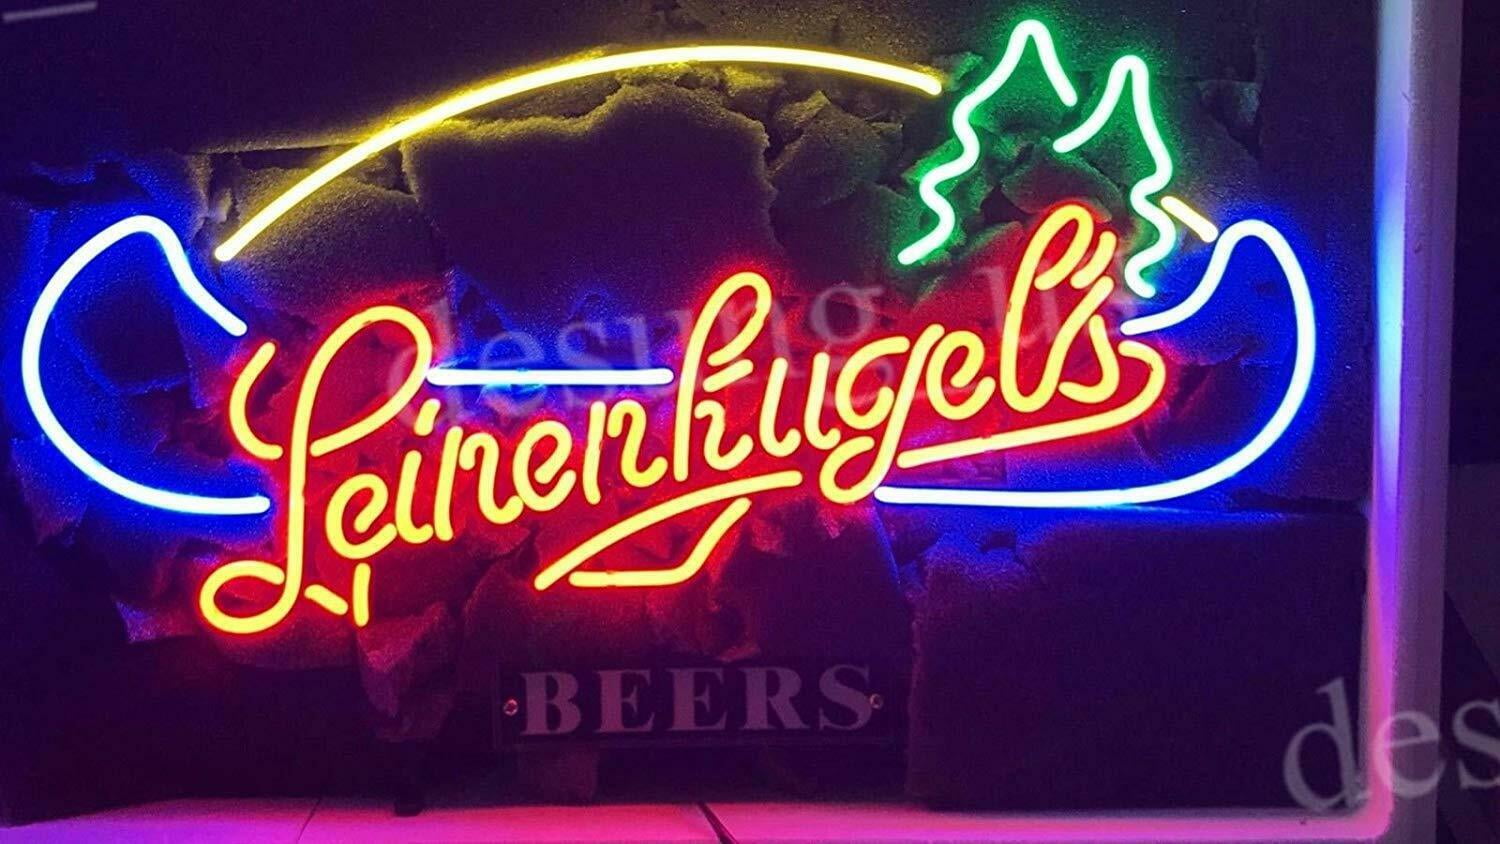 Yuengling Eagle Palm Trees Neon Sign 20"x16" Light Lamp Beer Bar Pub Wall Decor 